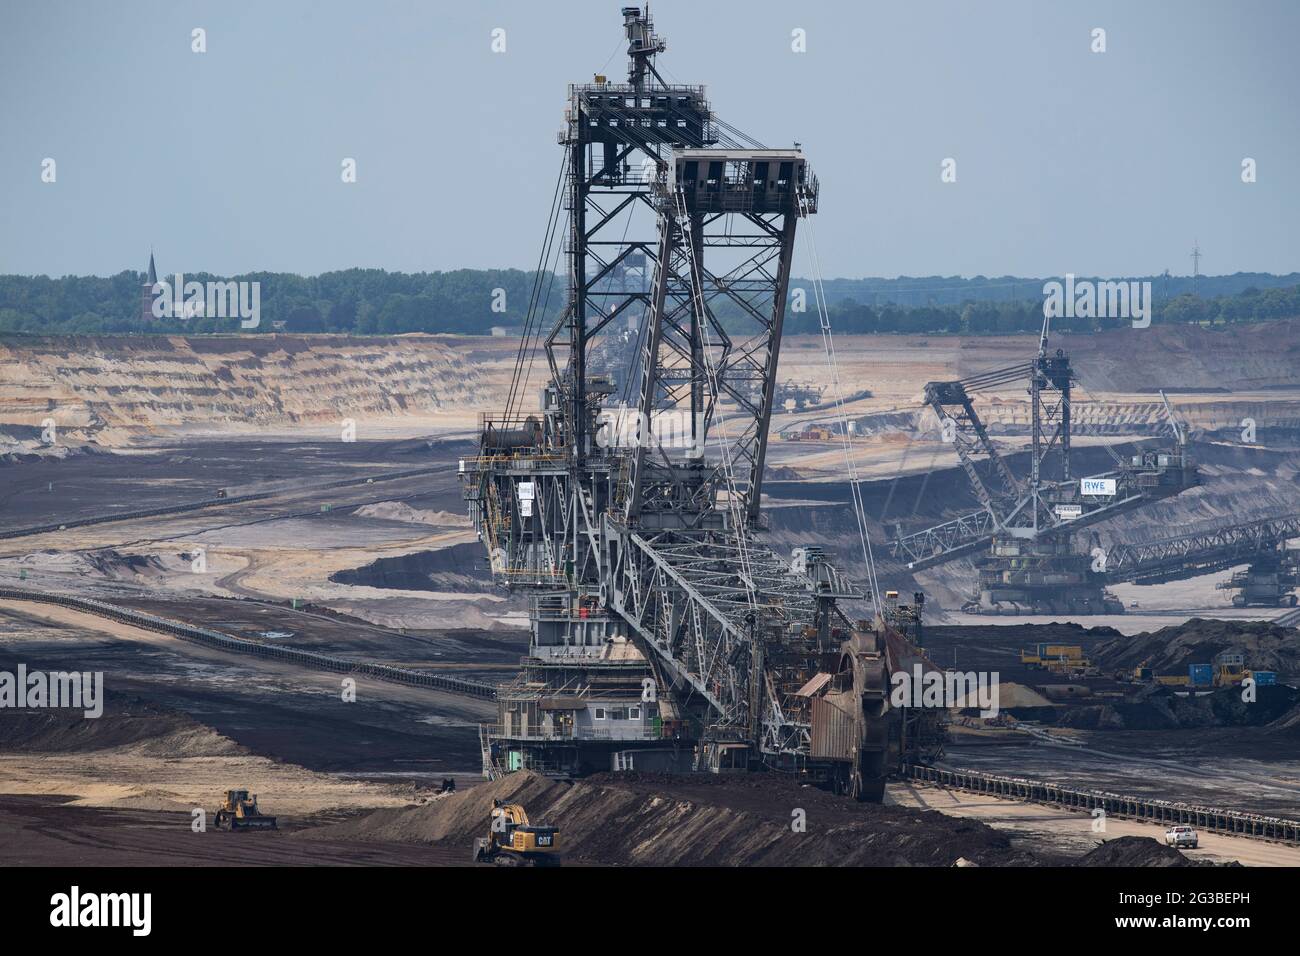 Garzweiler, Deutschland. 11th June, 2021. Overview, in the middle a bucket wheel excavator, large equipment, view of the lignite opencast mine Garzweiler, on June 11th, 2021 Â Credit: dpa/Alamy Live News Stock Photo